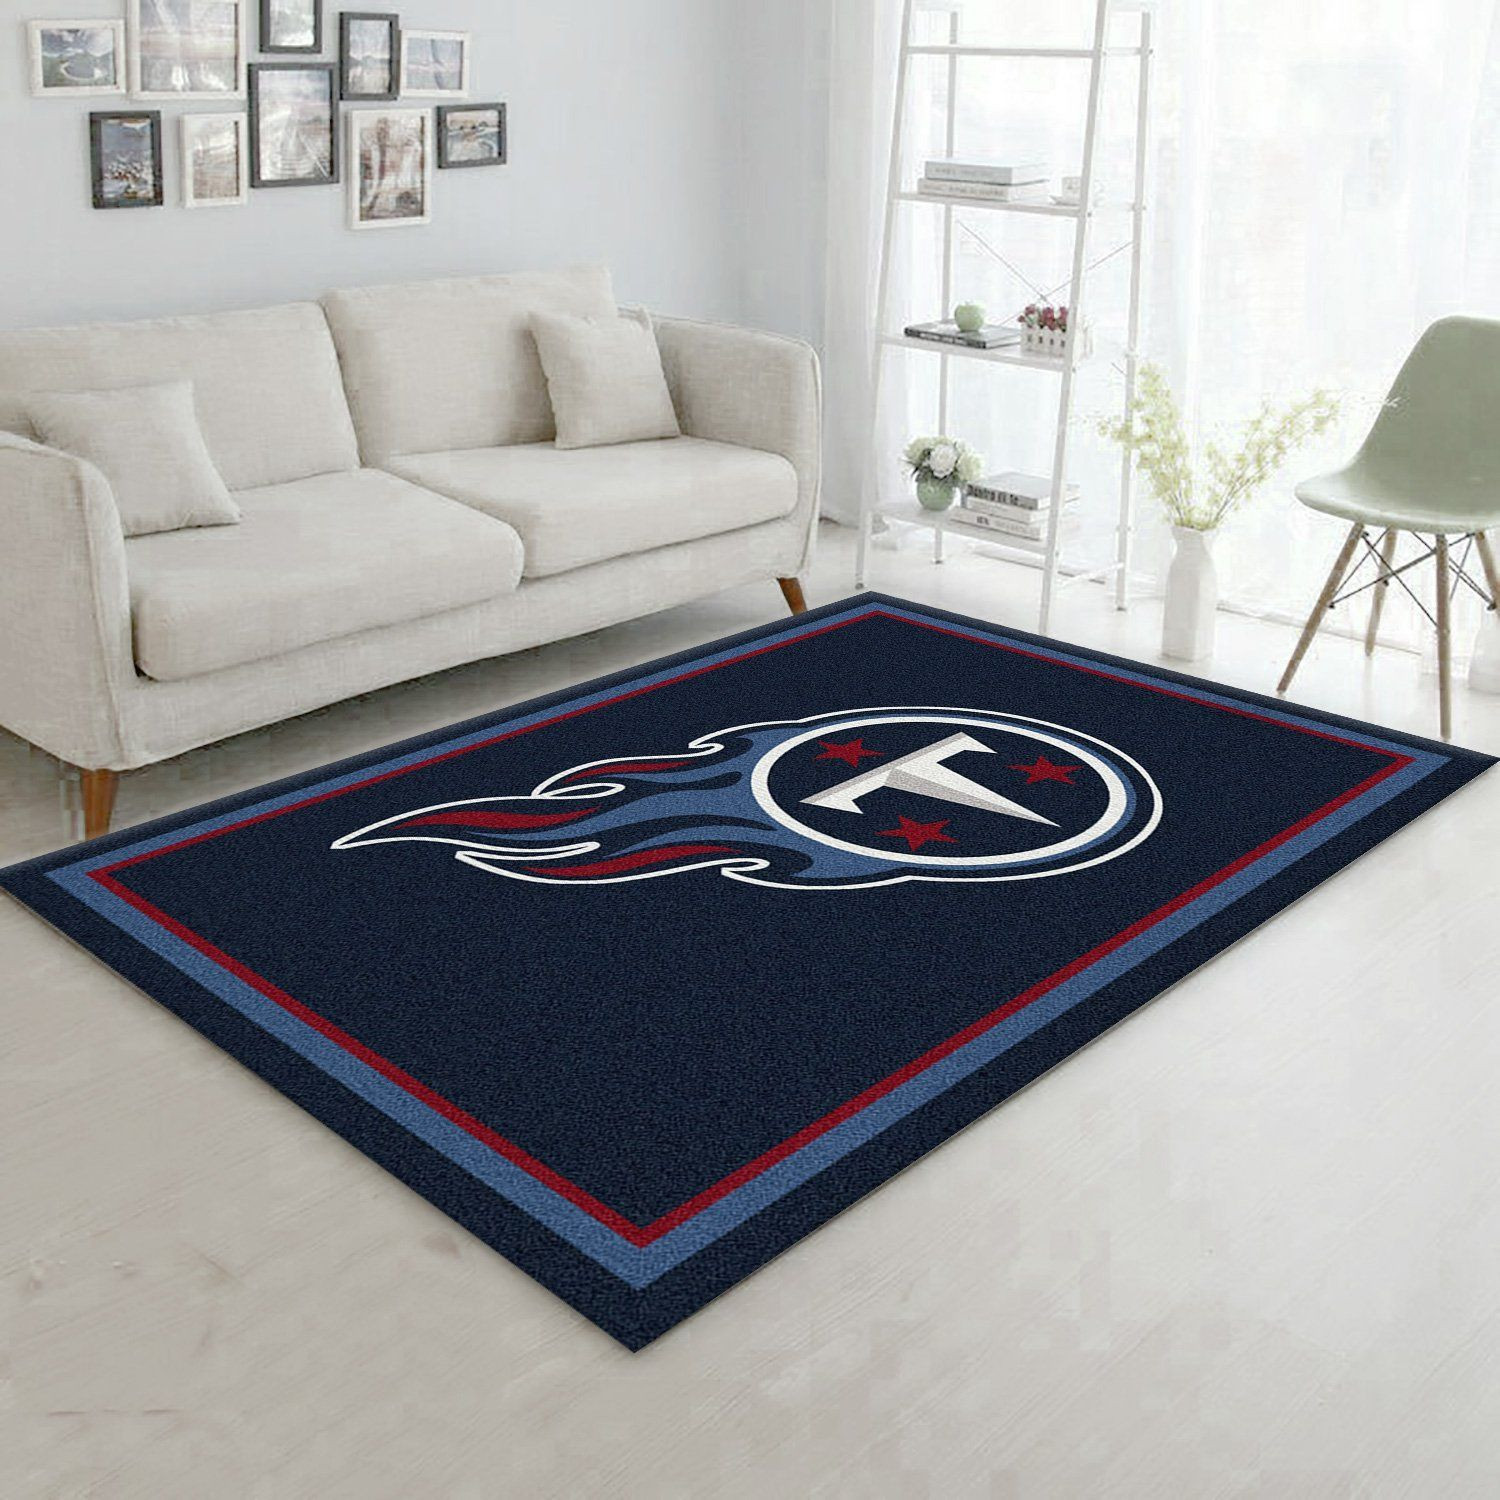 Nfl Spirit Tennessee Titans Area Rug For Christmas, Bedroom Rug, Home US Decor - Indoor Outdoor Rugs 2